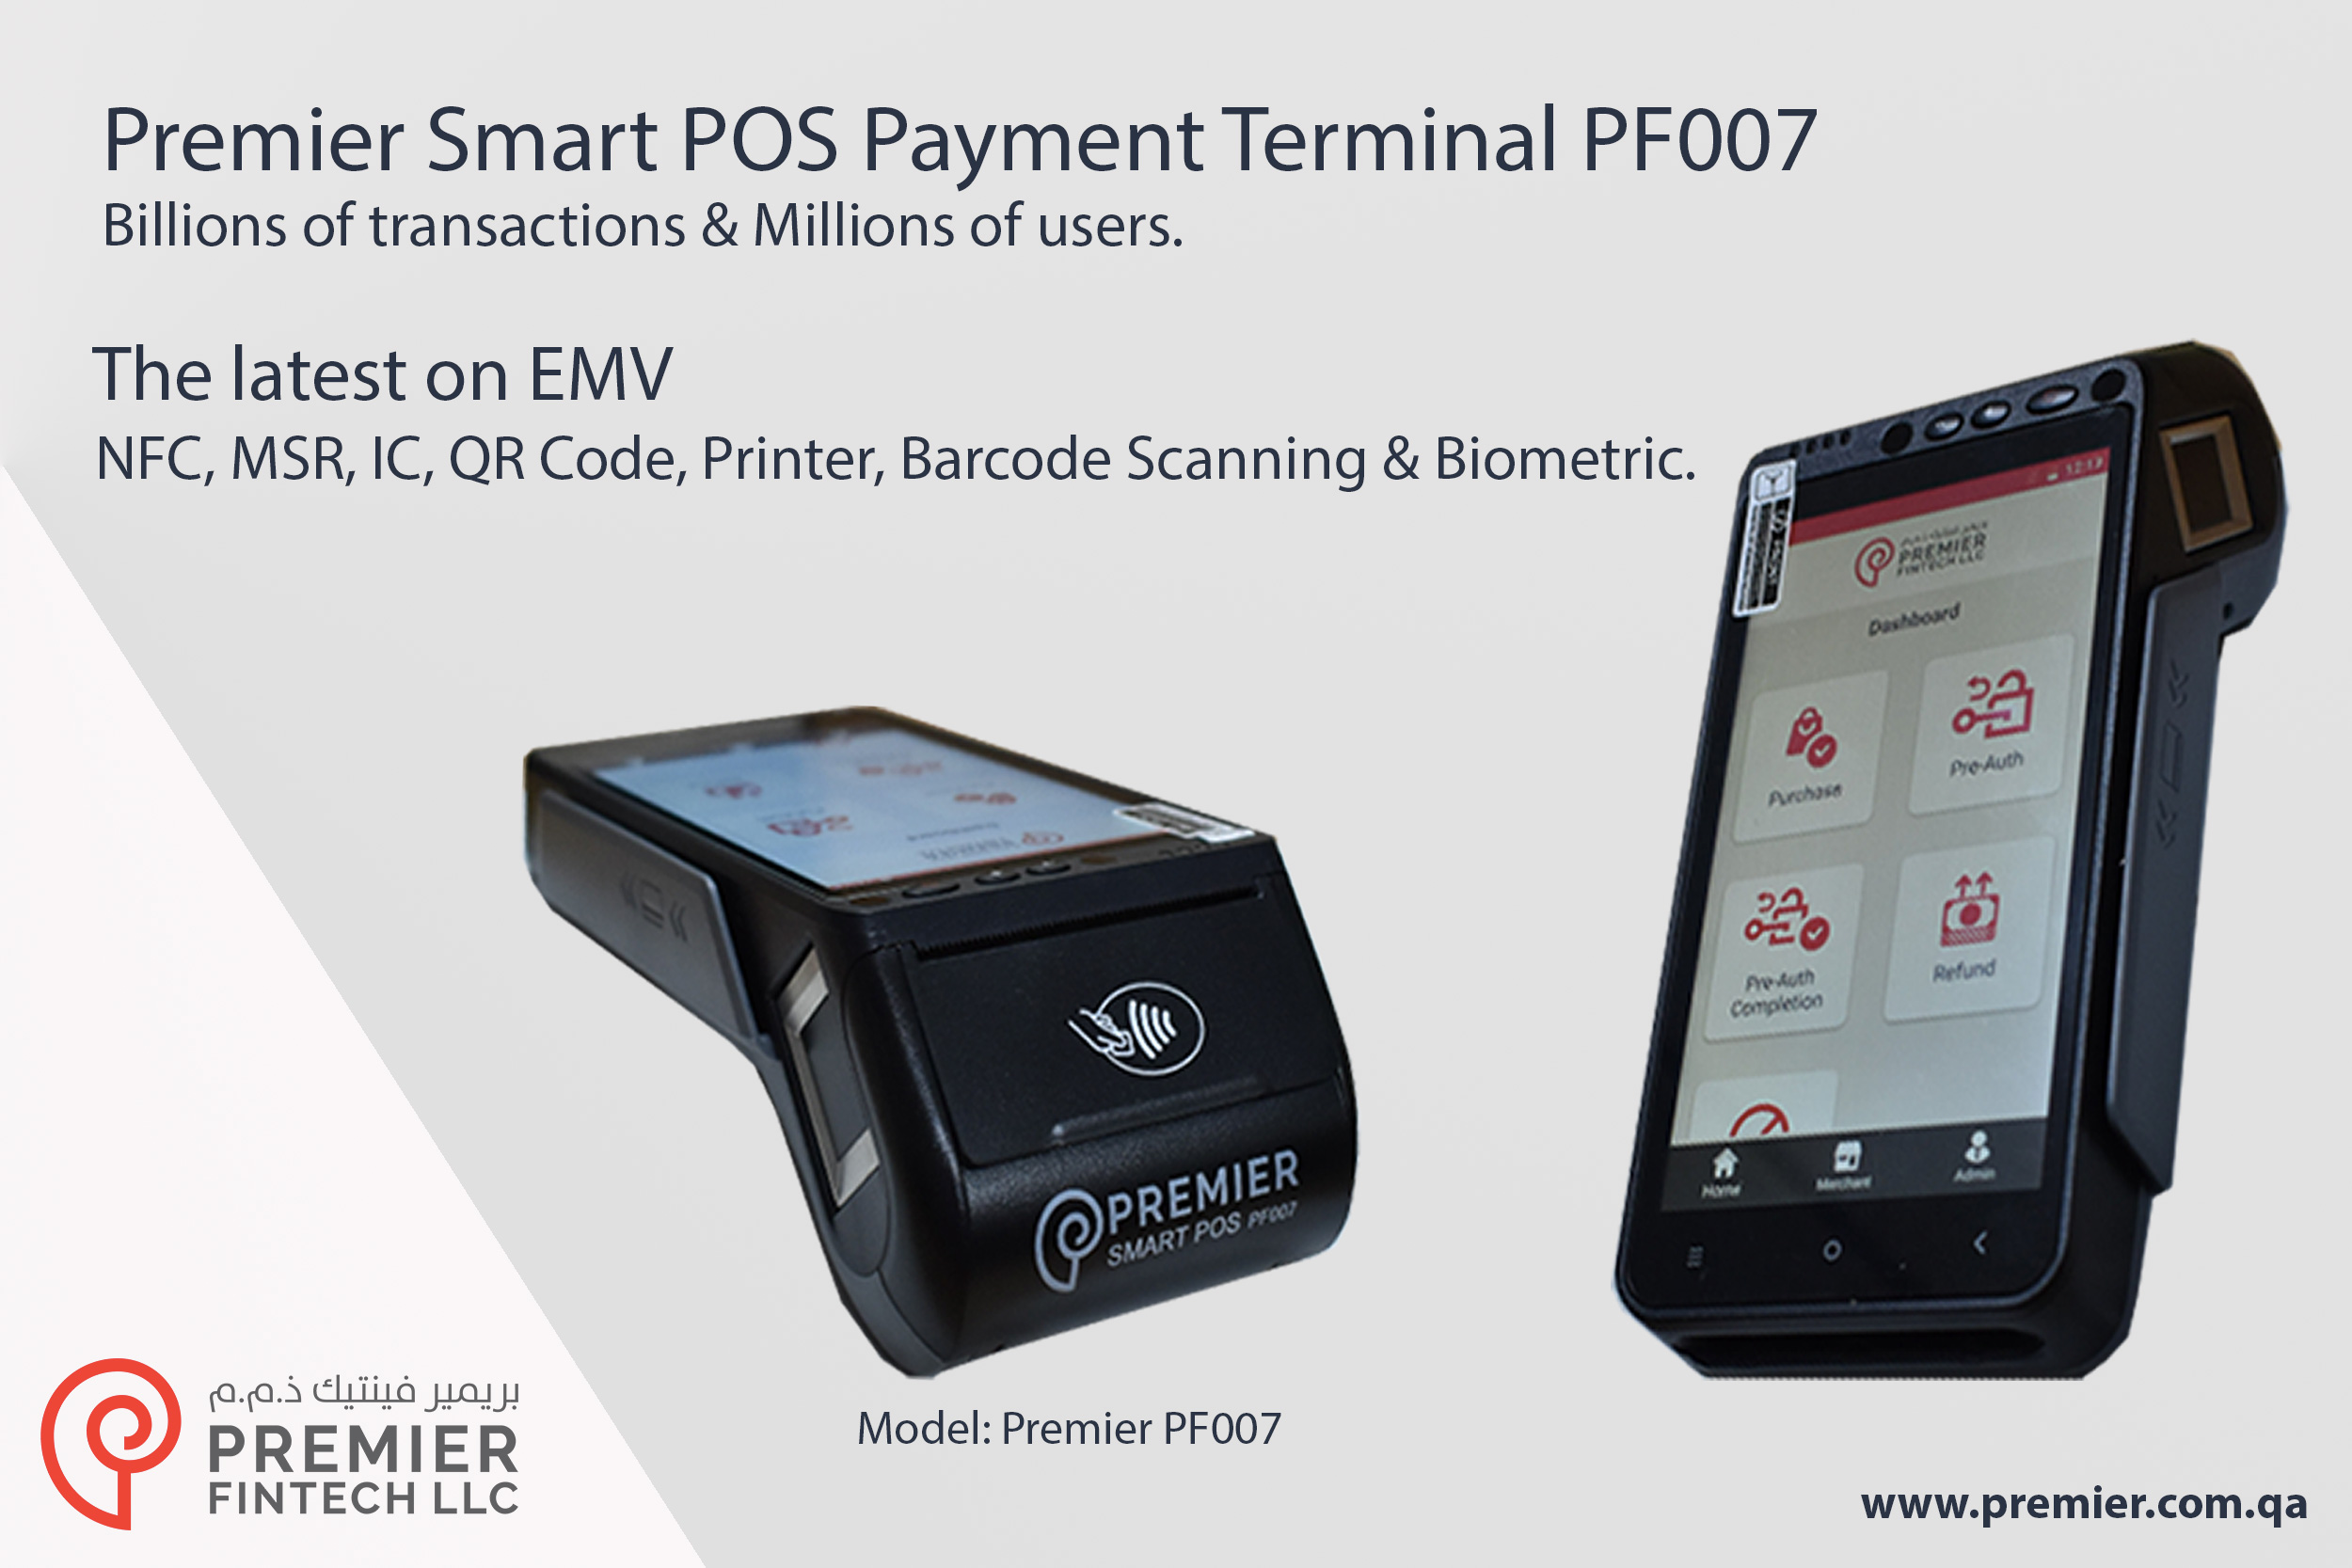 Contactless Payments during Covid-19